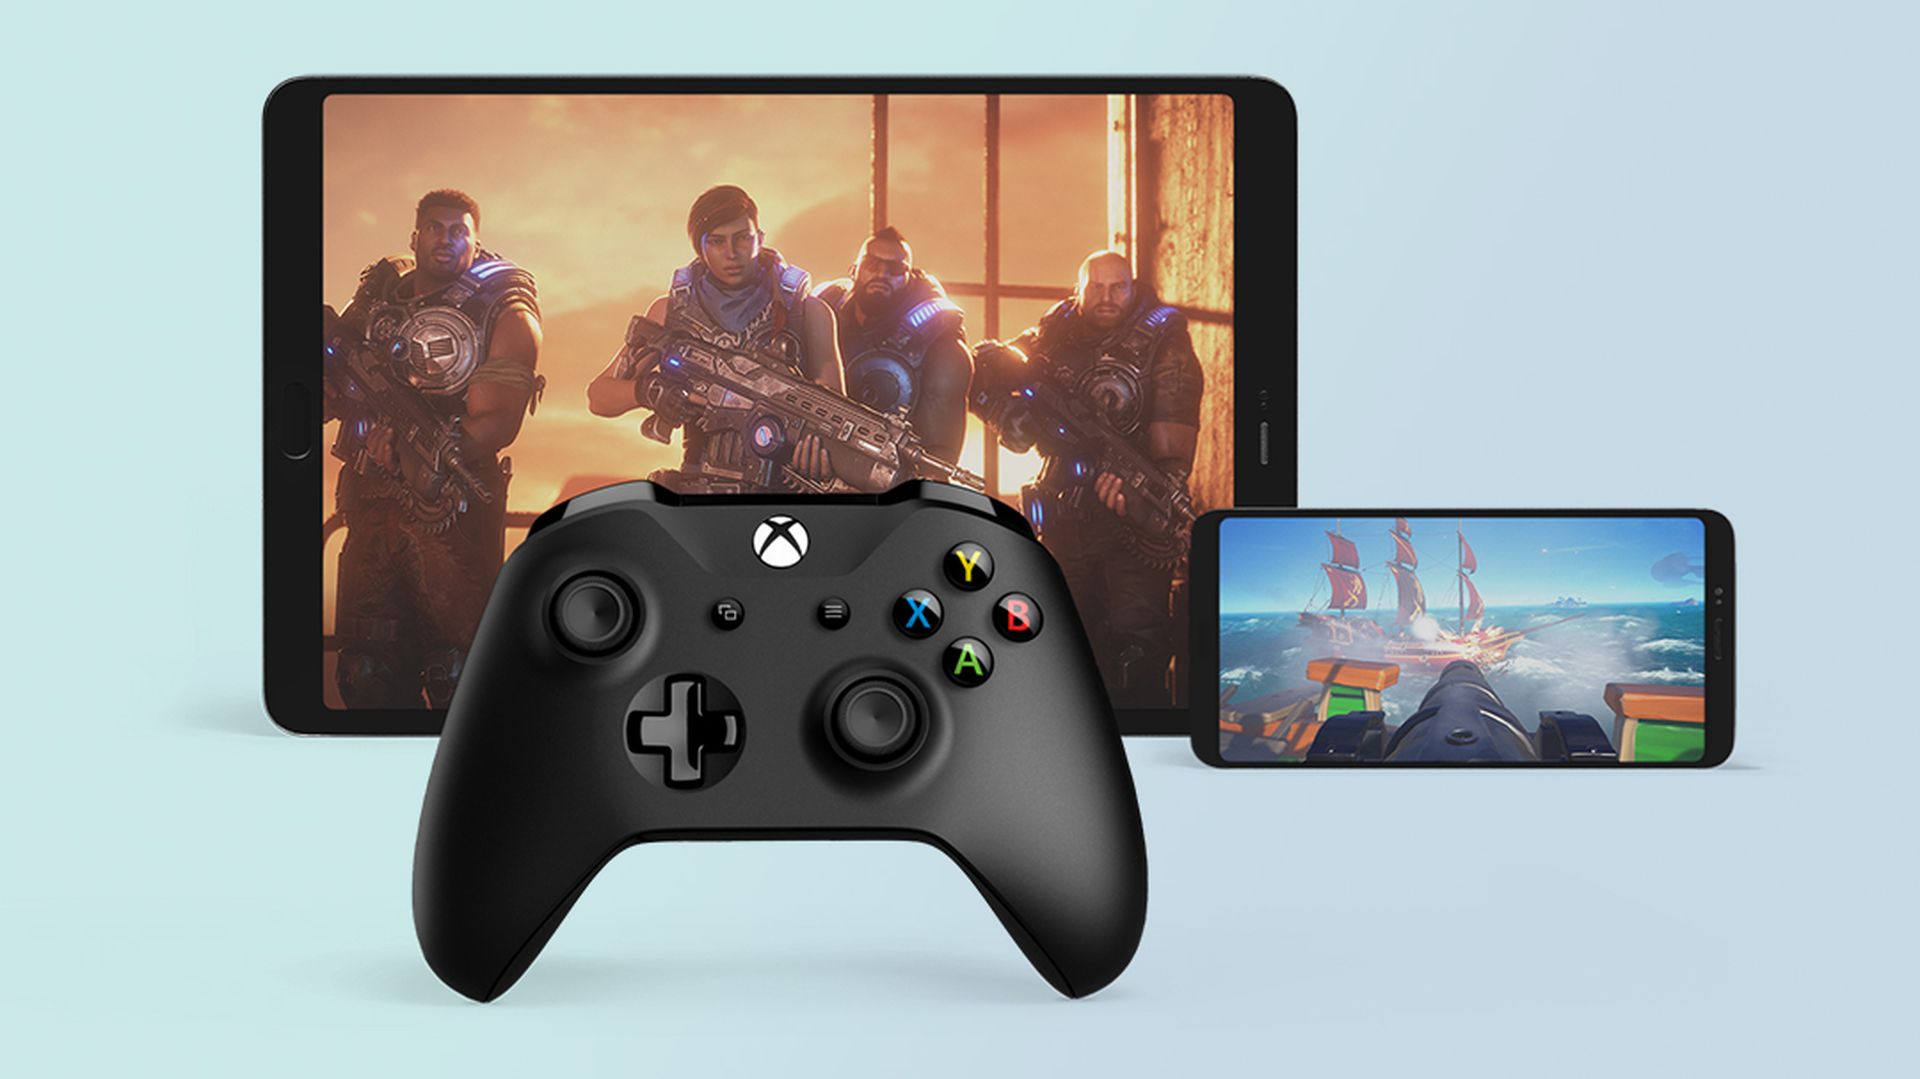 In this article, we are going to be covering how to play Xbox games on your phone, so you can play your favorite games wherever you go.